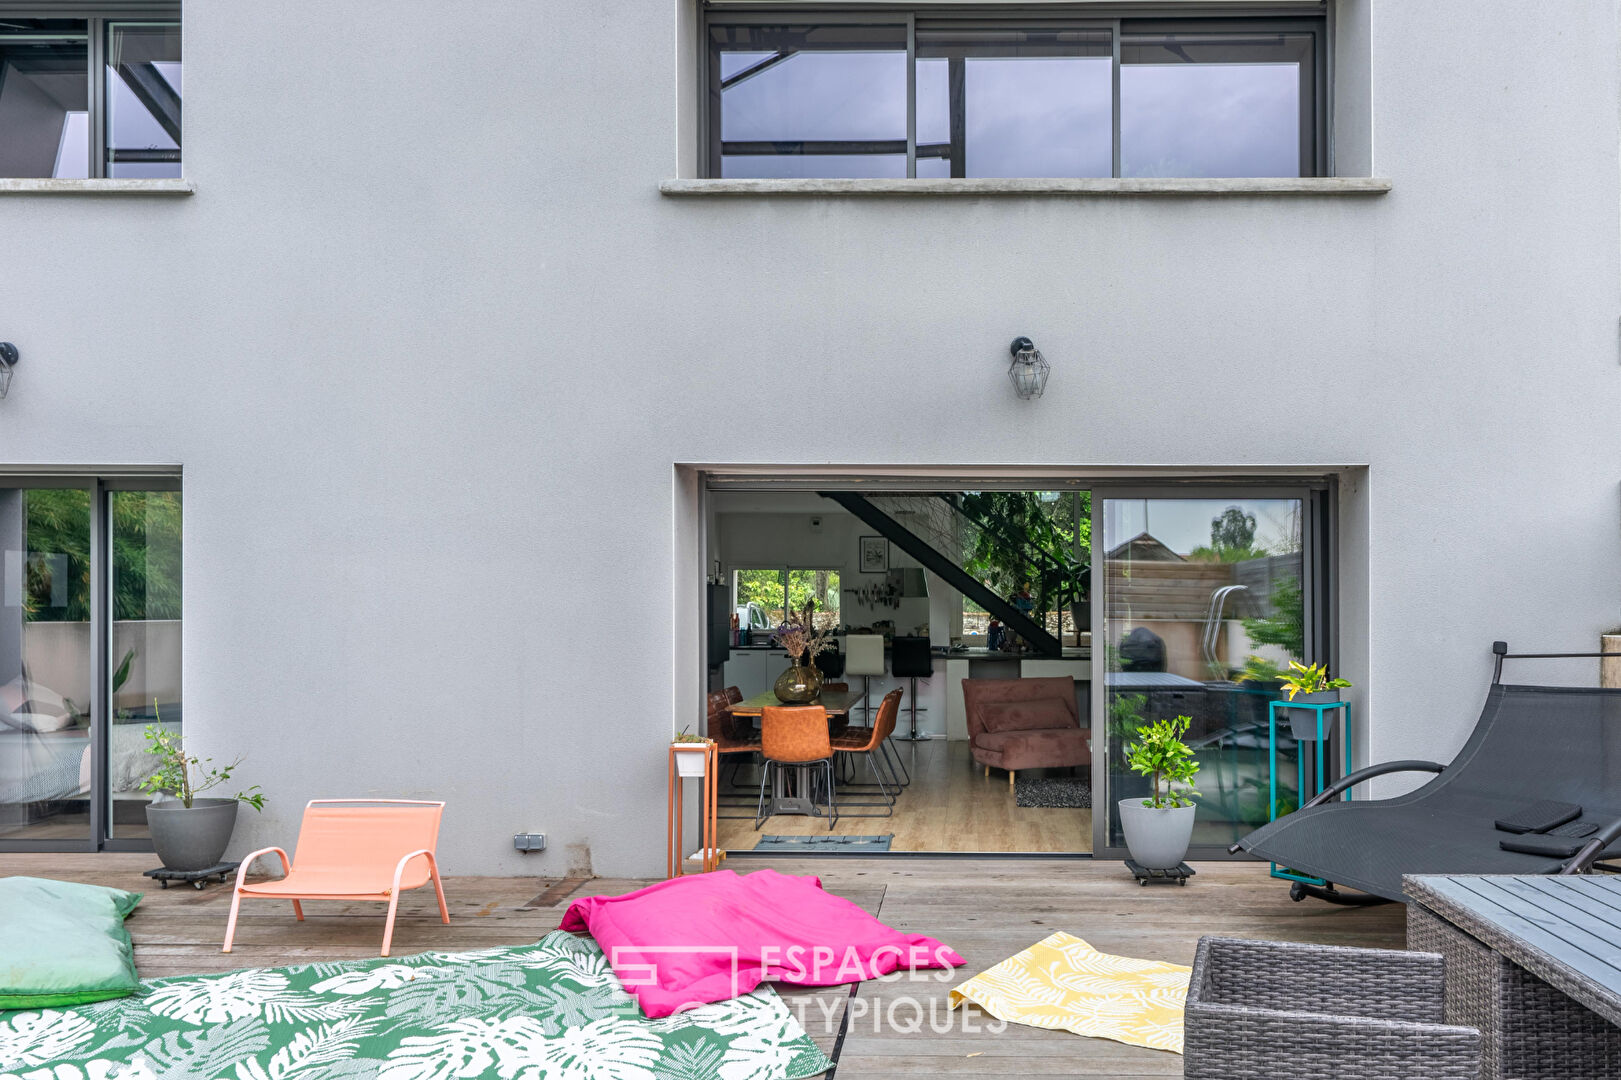 Ecological loft and its spacious terrace with swimming pool